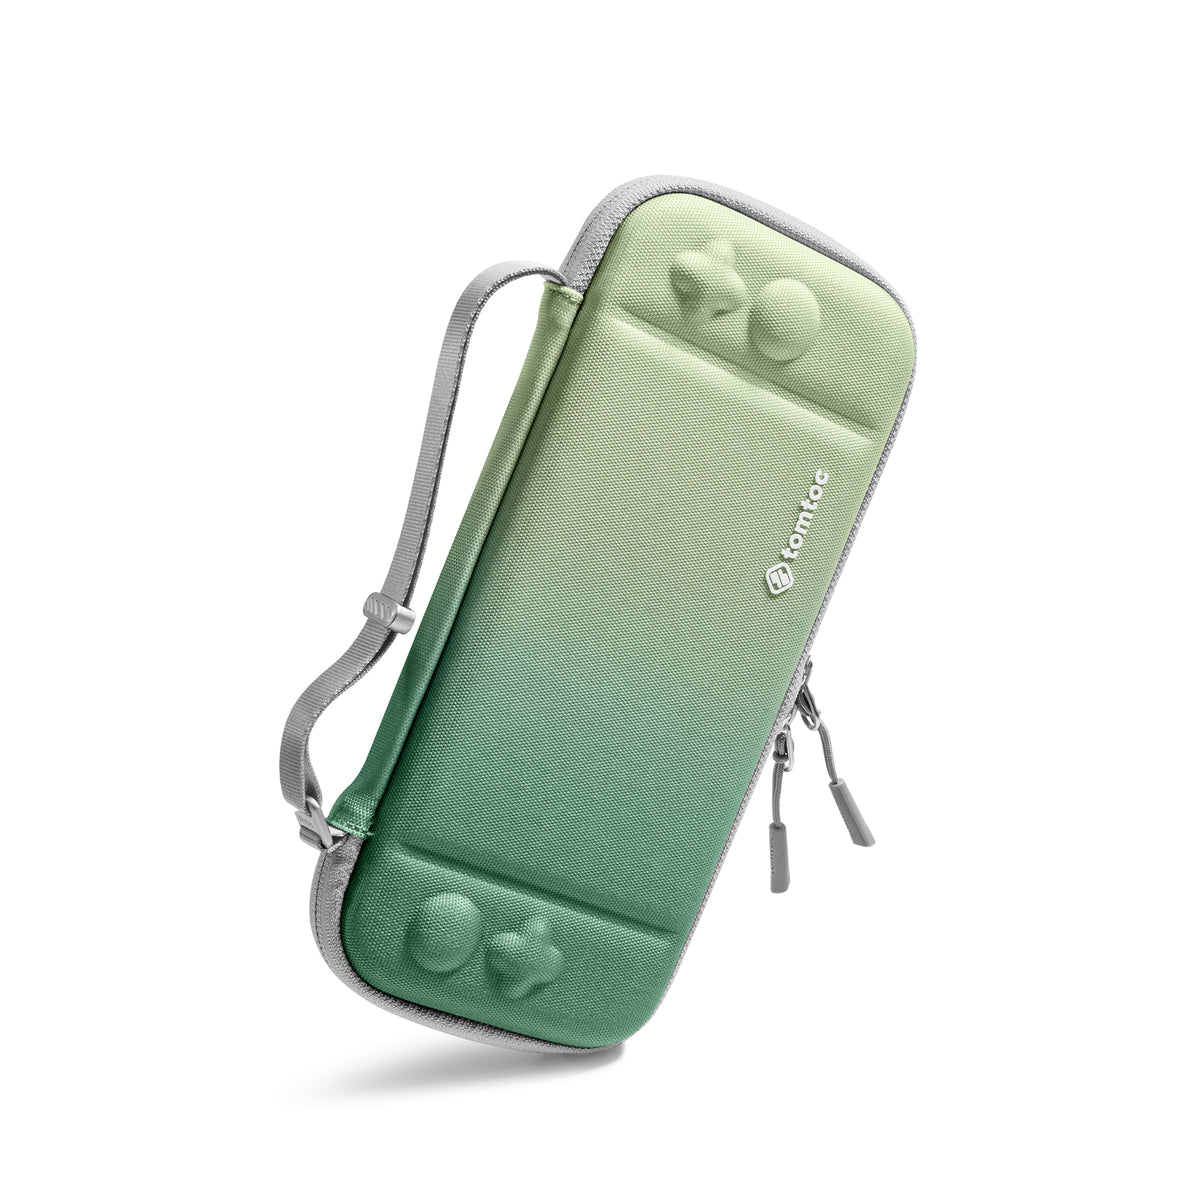 tomtoc Slim Protective Carrying Case with 10 Game Cartridges - Nintendo Switch & OLED Model - Matcha Green